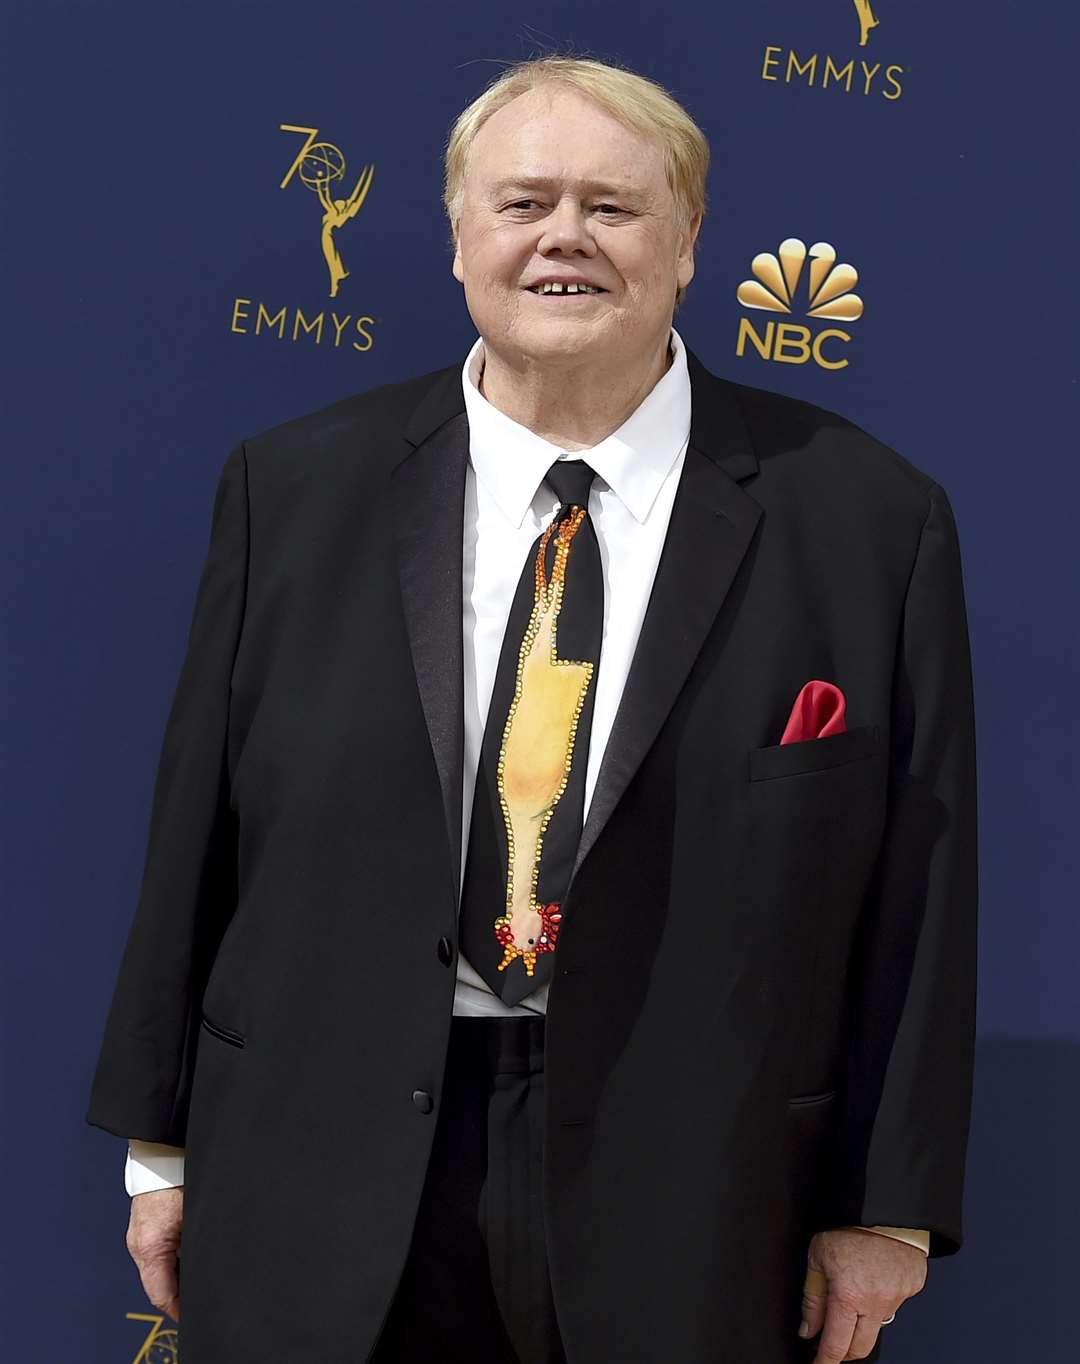 Louie Anderson at the Emmys in LA in 2018 (Jordan Strauss/Invision/AP)